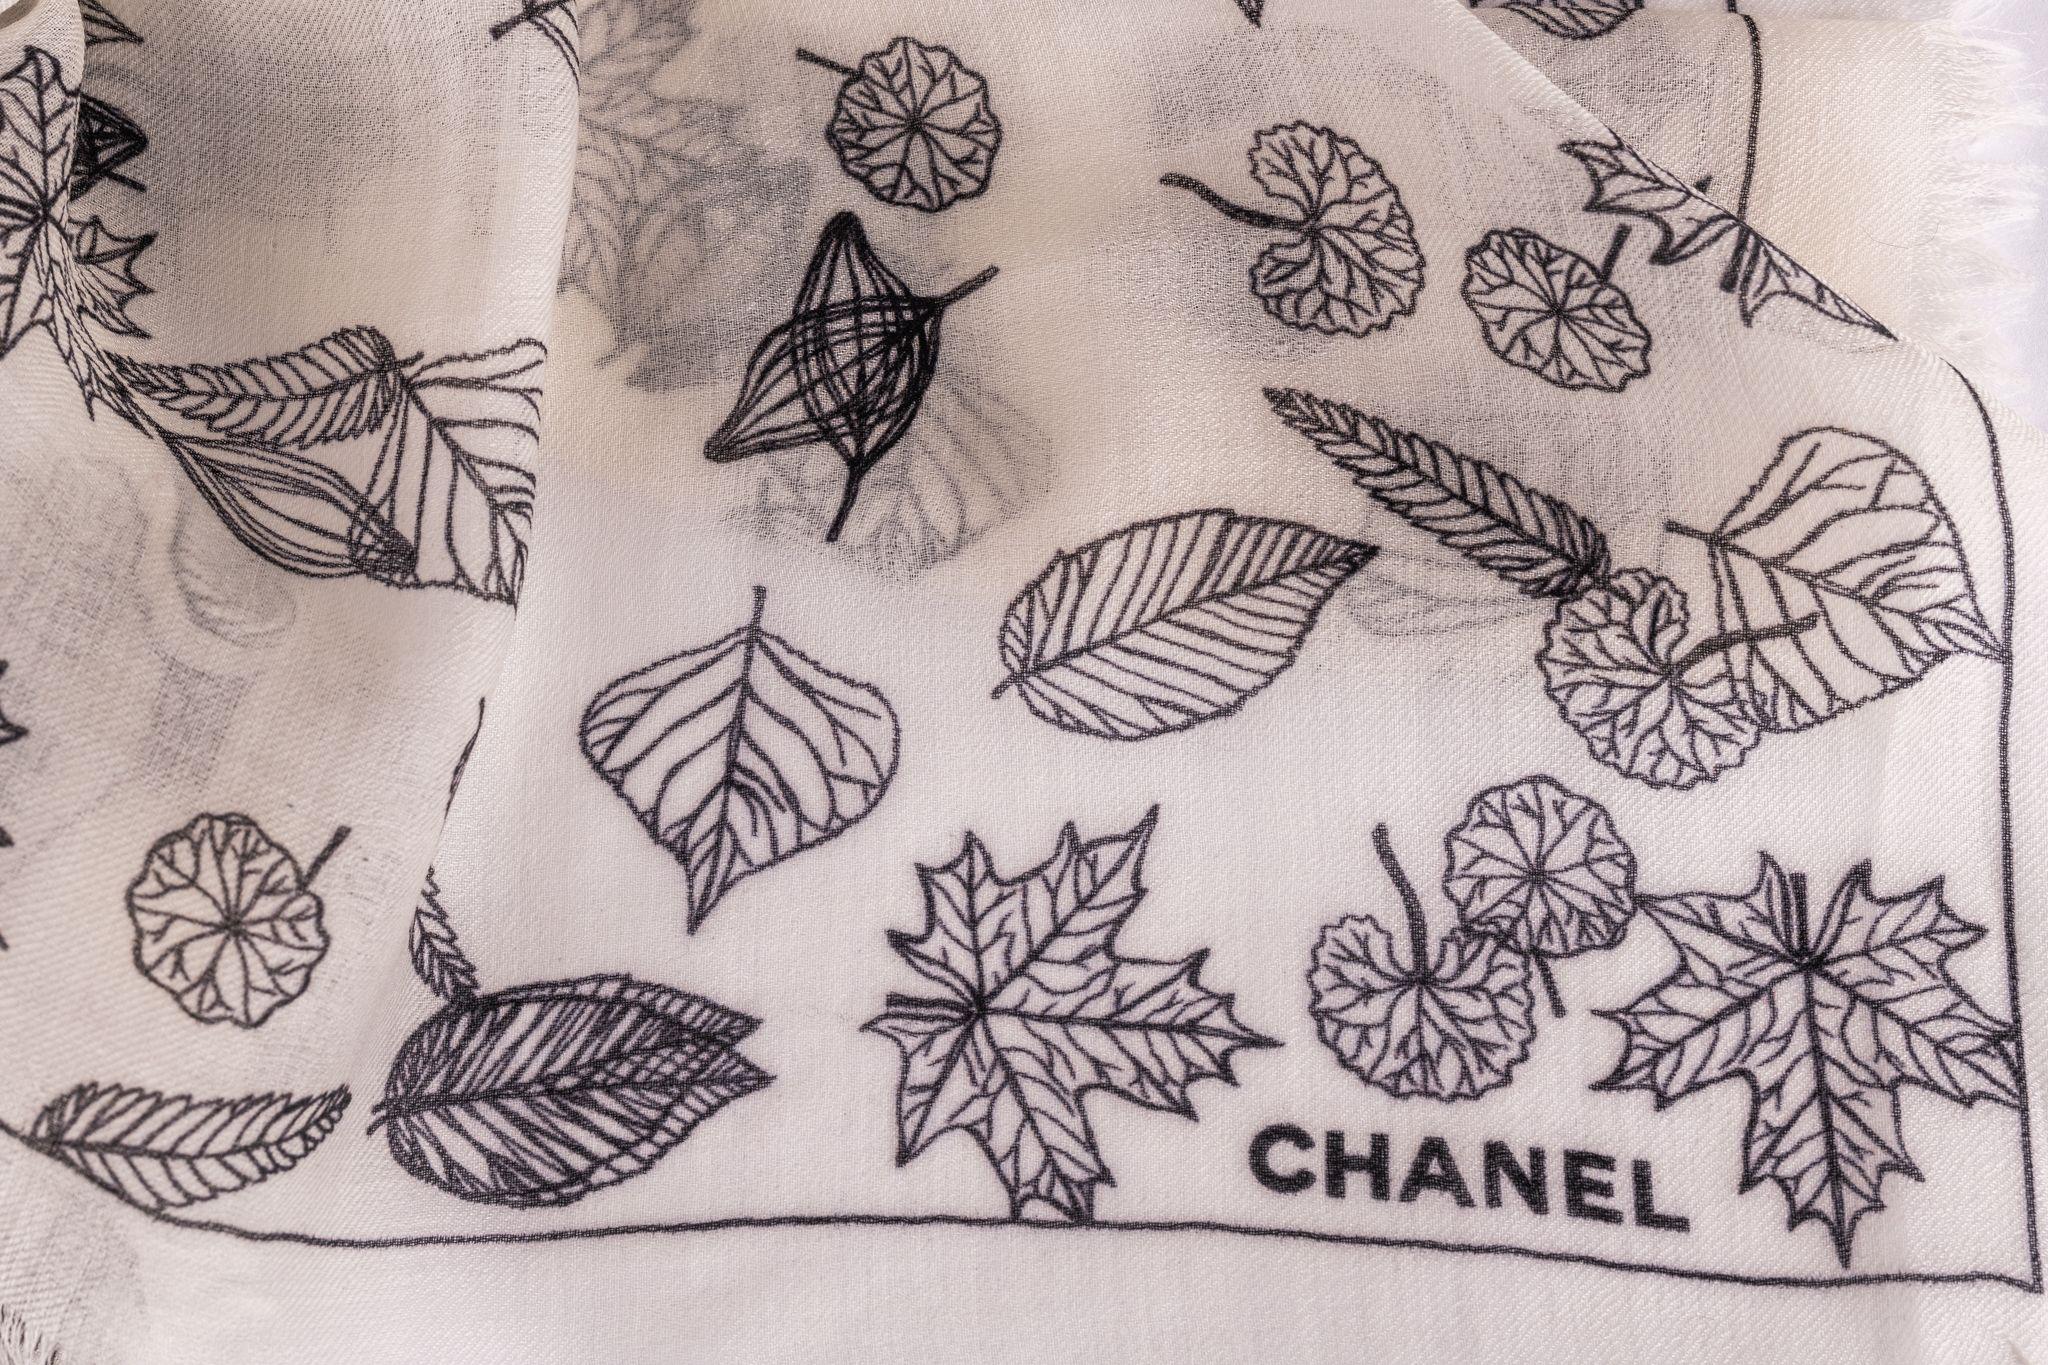 Chanel Cashmere Shawl in white with a big CC logo in the center. The logo is designed with leaves so is the frame of the scarf. The item is in new condition.